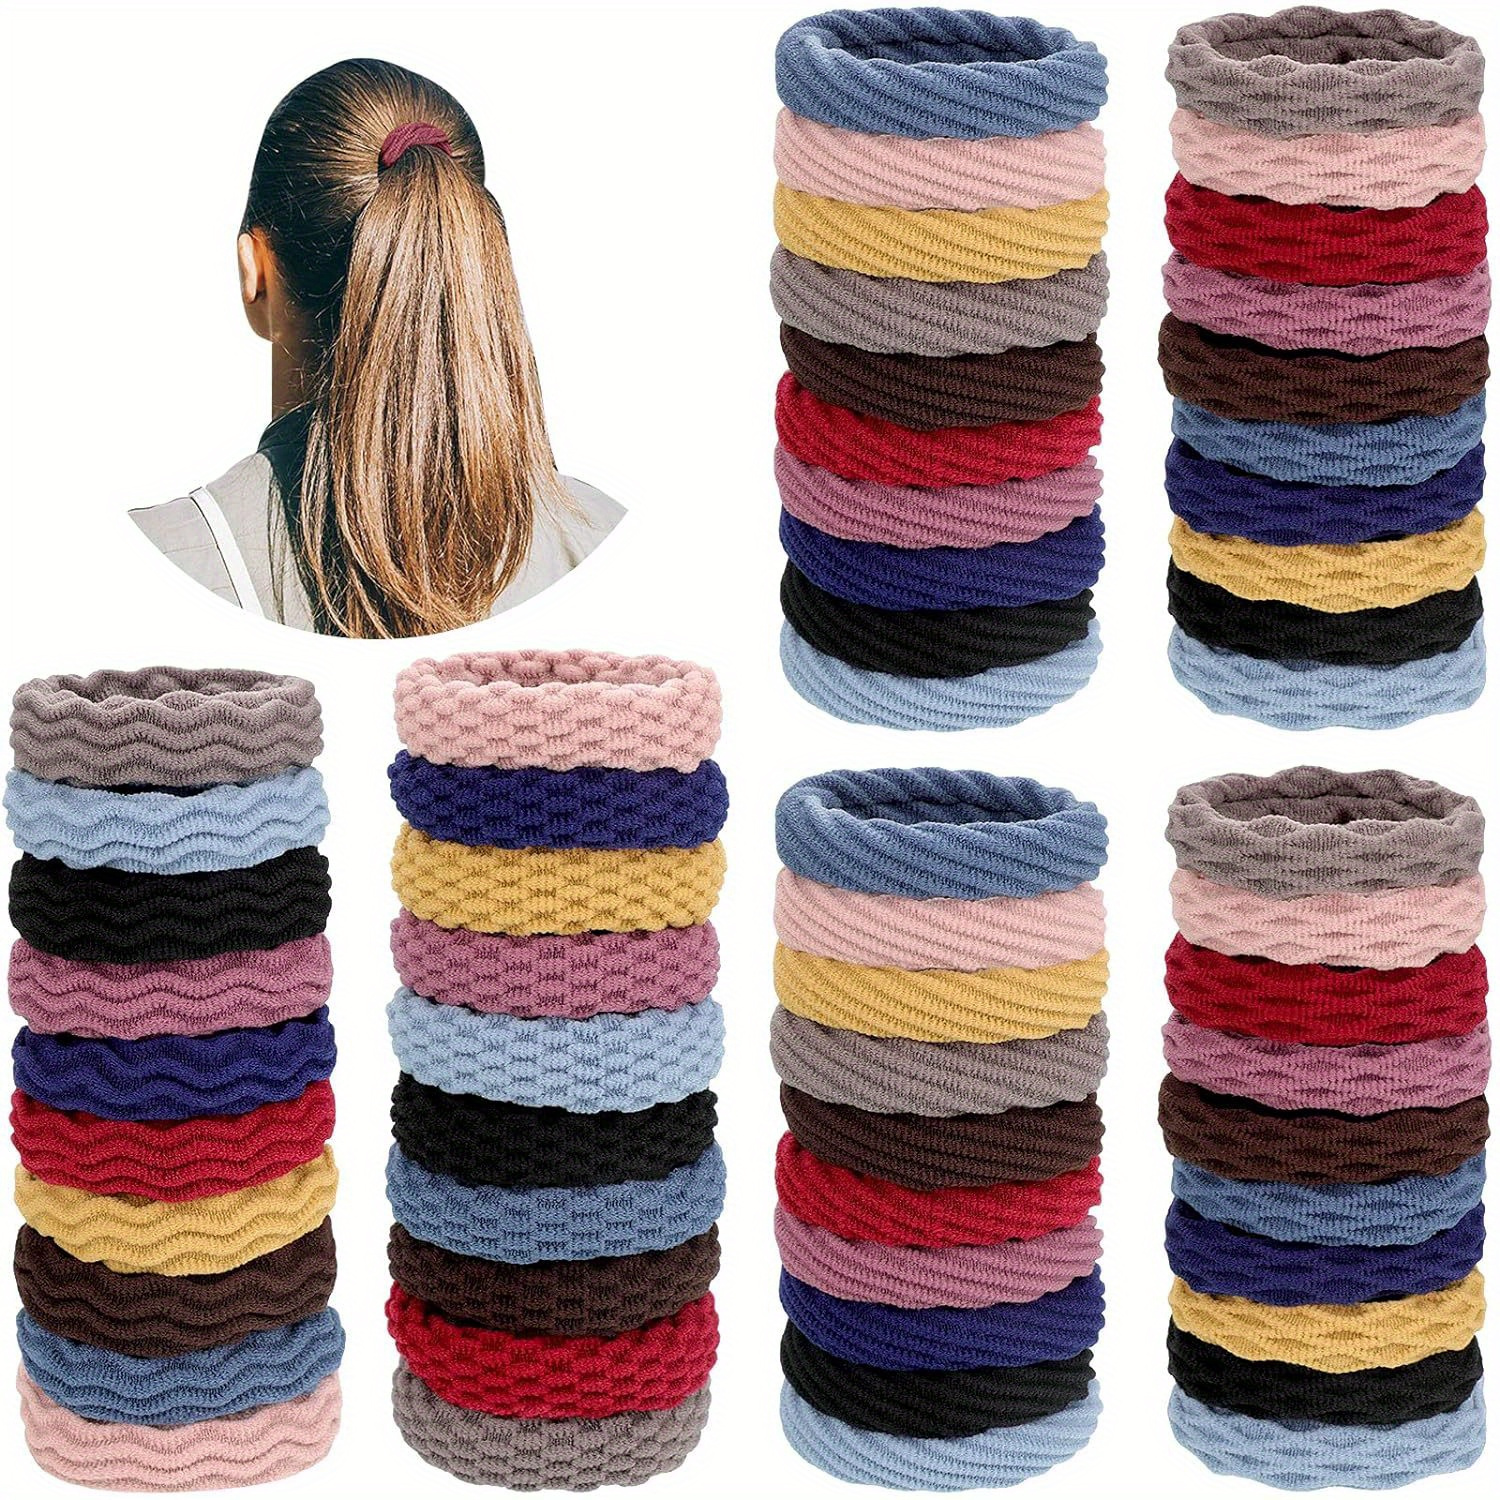 

50pcs Solid Color Elastic Hair Ties Non Slip Thickened Ponytail Holder Trendy Hair Styling Accessories For Daily Uses